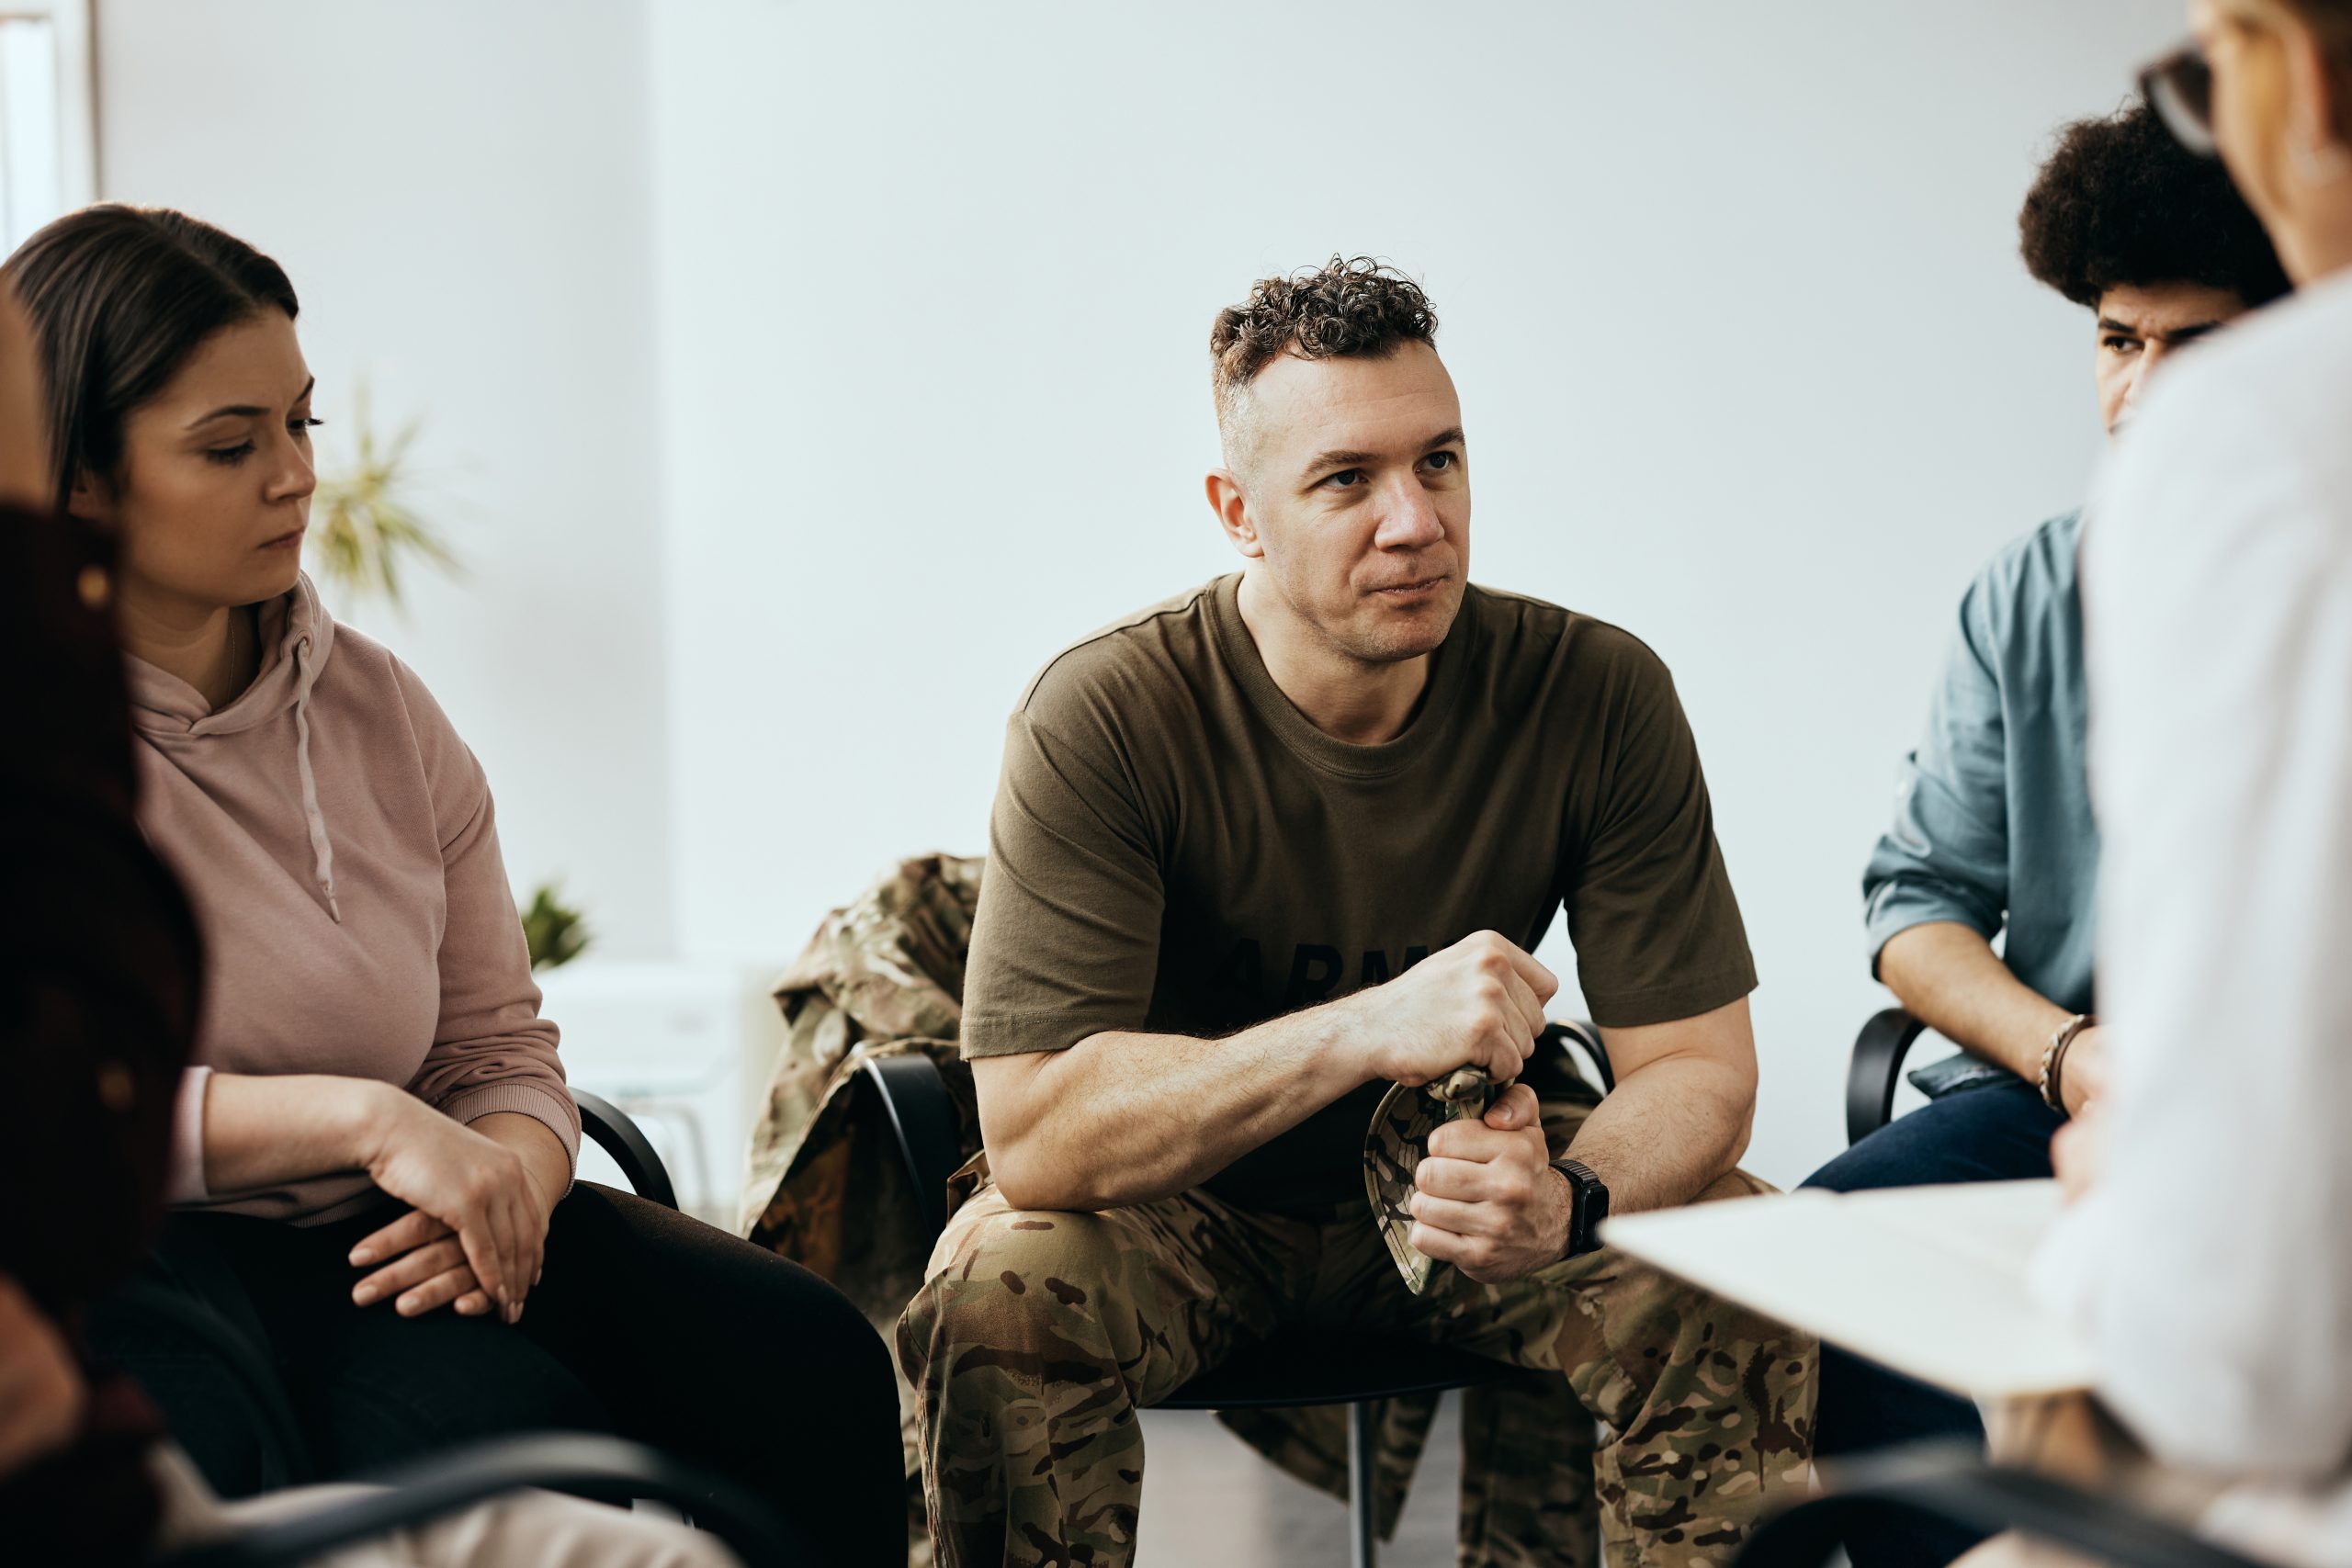 Military officer listening to therapist while having group therapy meeting at community center.